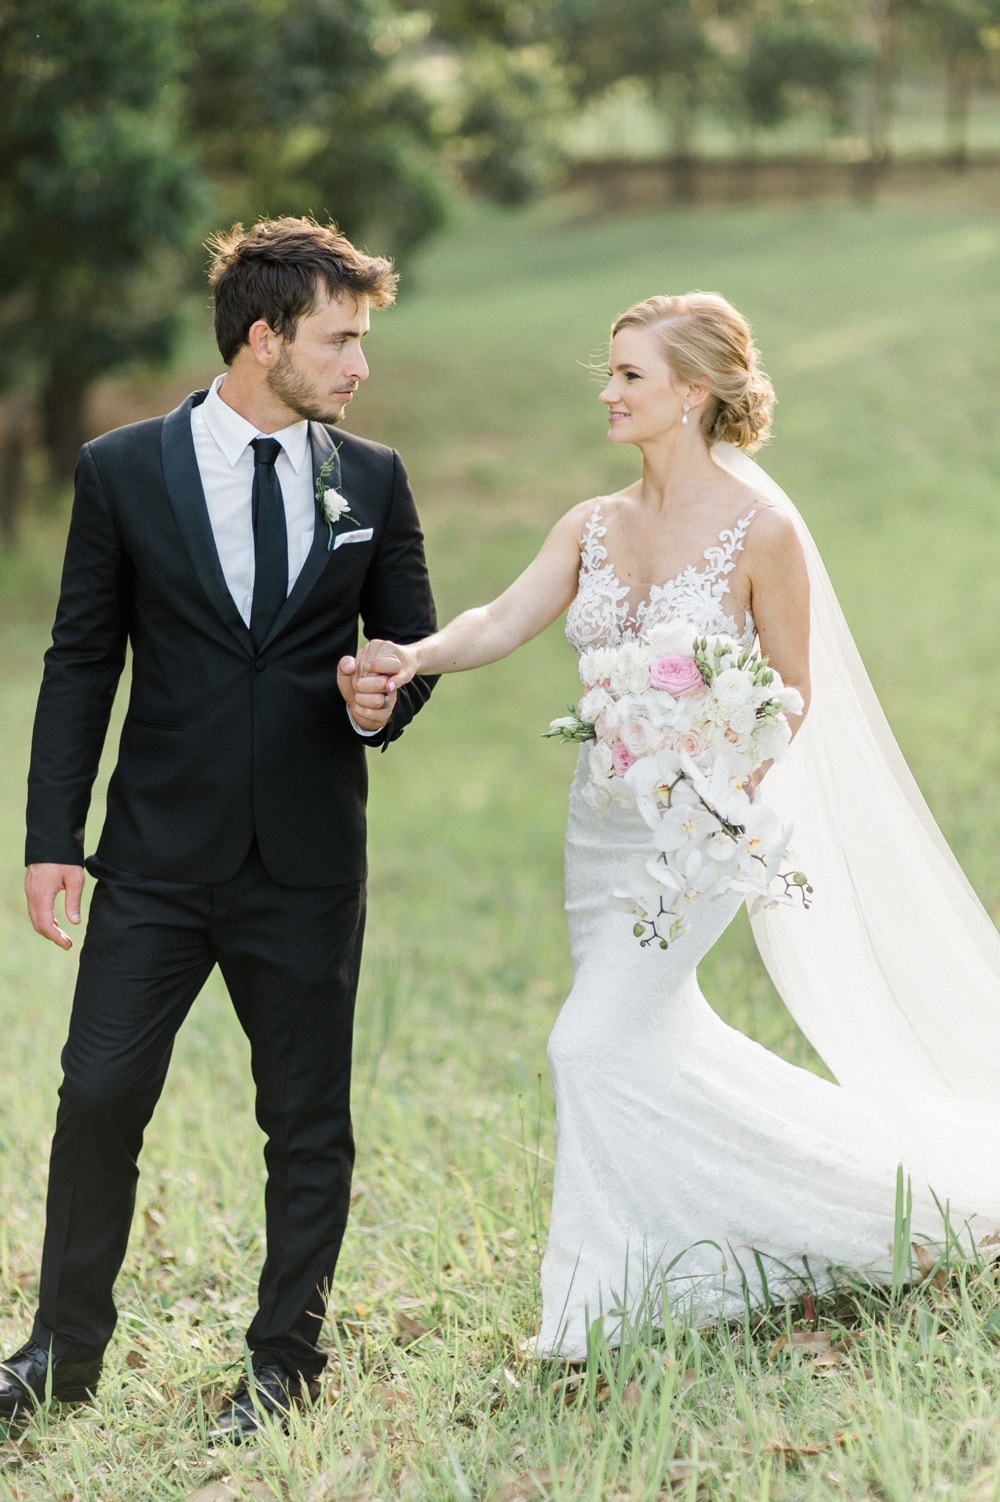 Hanrie Lues Wedding Gown for a Classic Durban Bride | Image: Bright Girl Photography